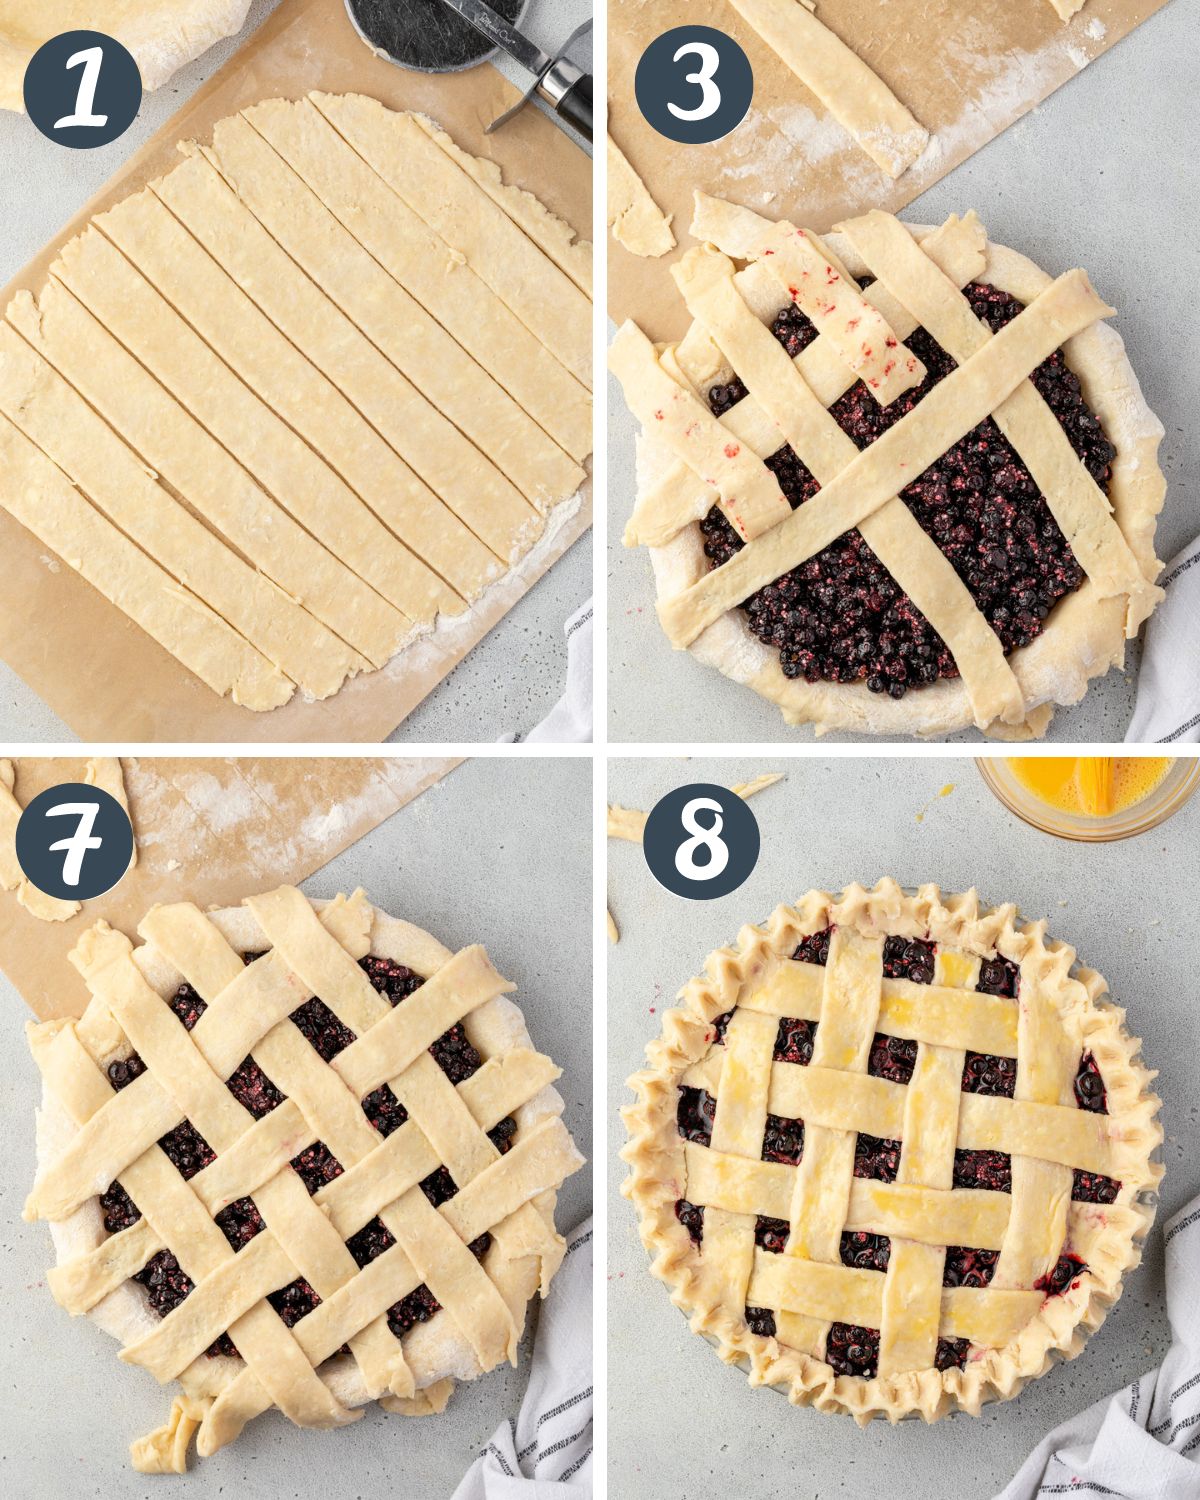 4 images that show some of the steps for doing a lattice crust, including cutting strips, pulling back some vertical strips, laying donw horizontal strips, and crimping edges.